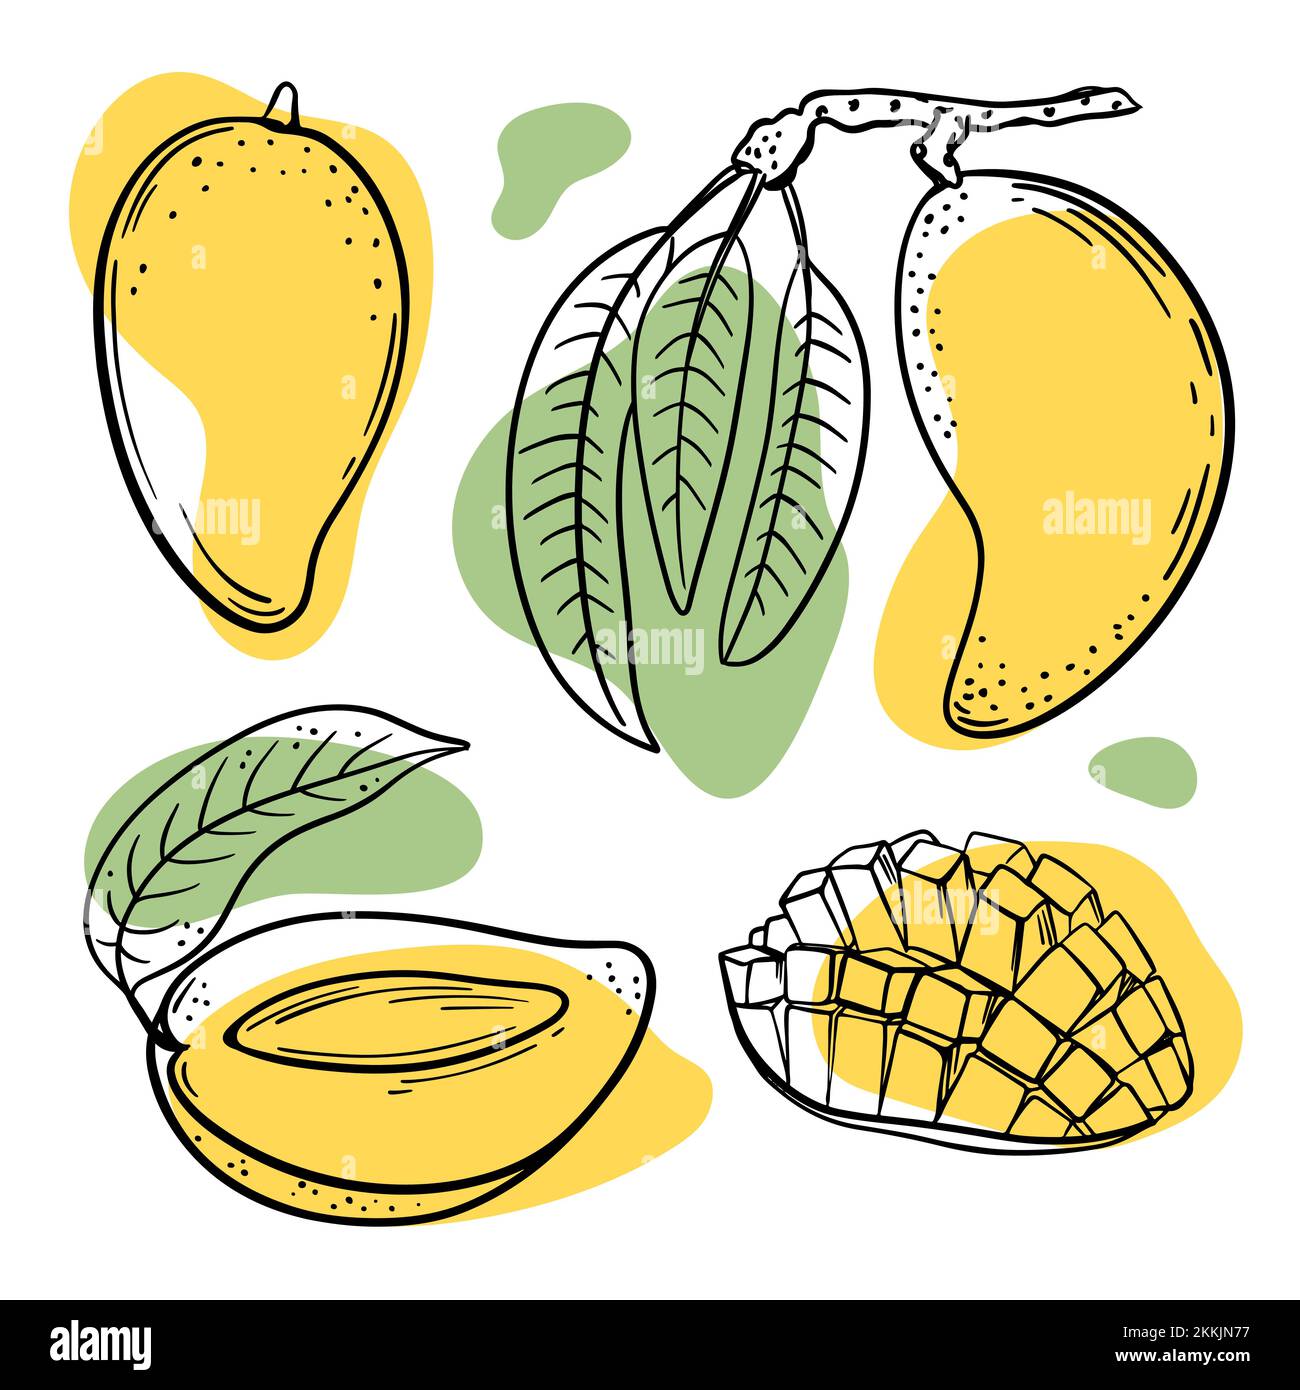 MANGO BRANCH Abstract Delicious Tropical Fruits Whole And Slices With Leaves For Design Of Grocery Store And Restaurant Menu In Sketch Vector Illustra Stock Vector